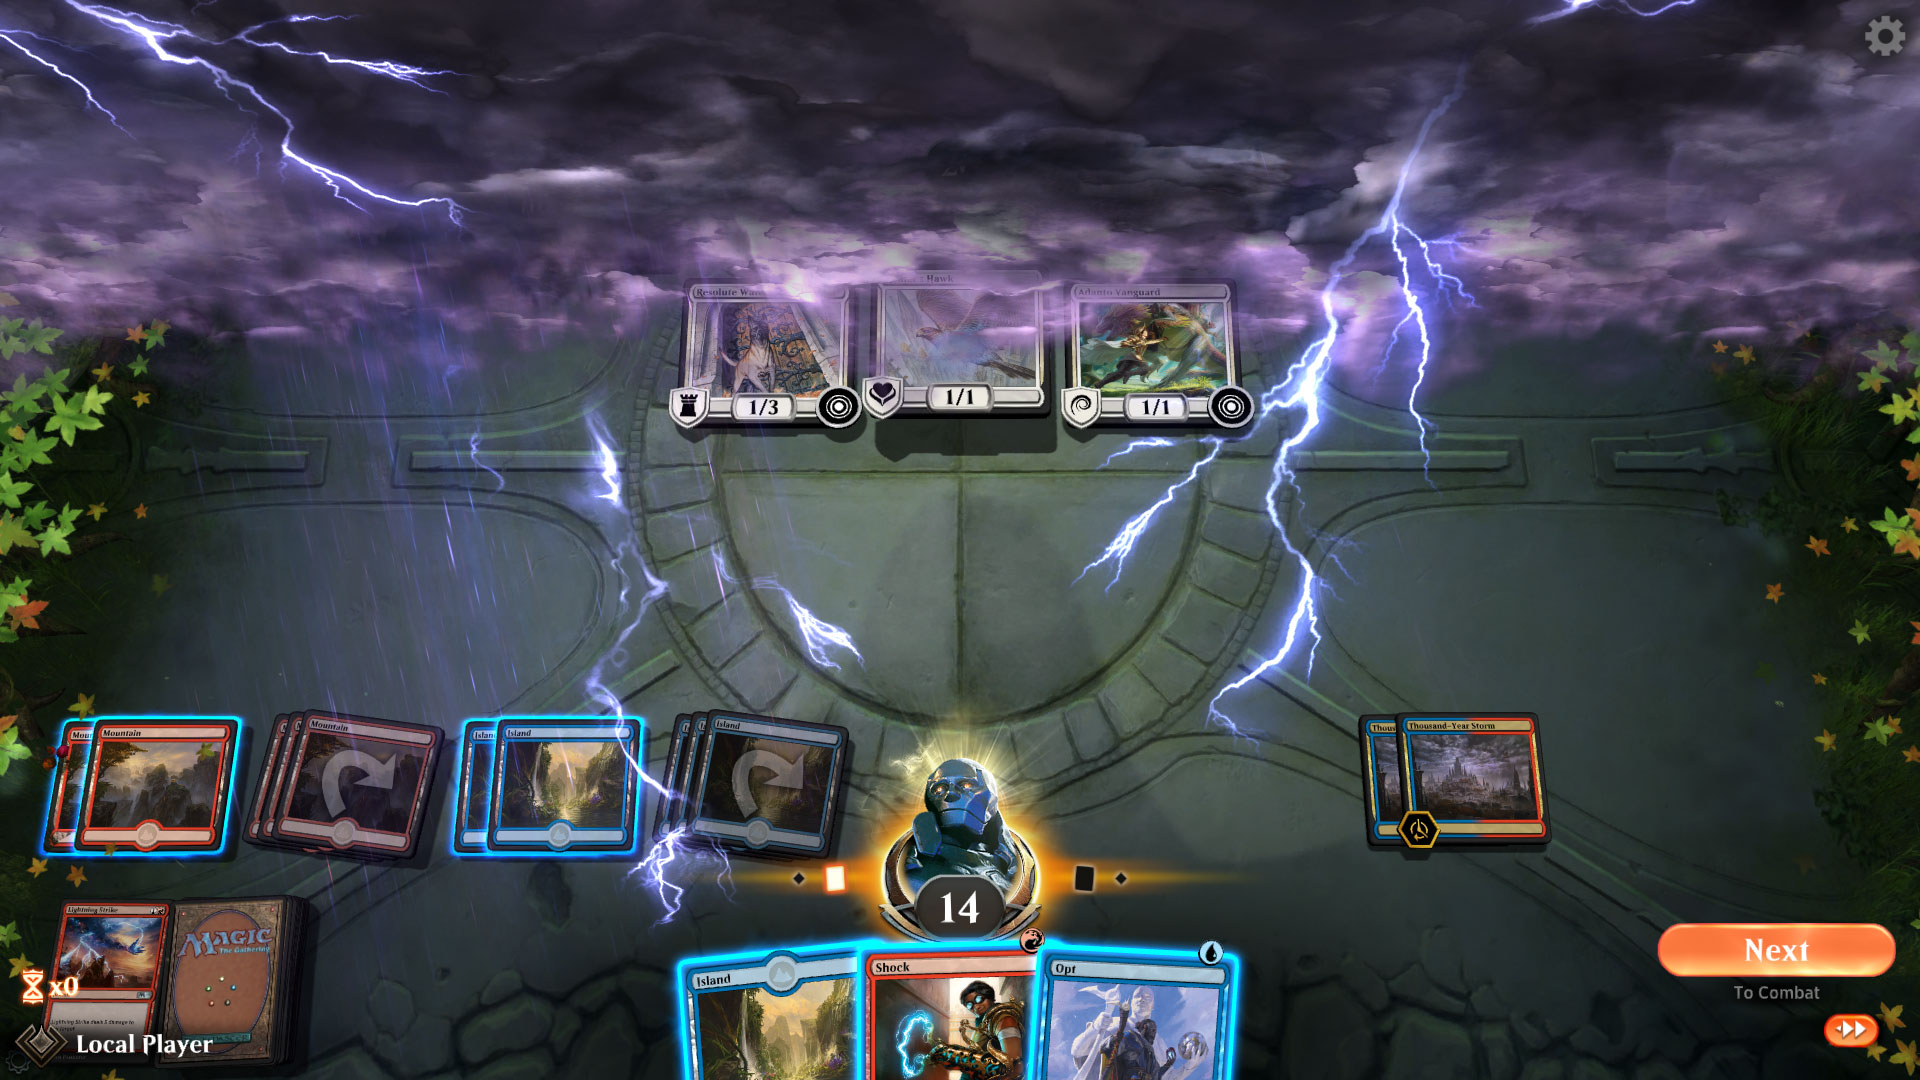 Magic: The Gathering Arena - a stormy playing field